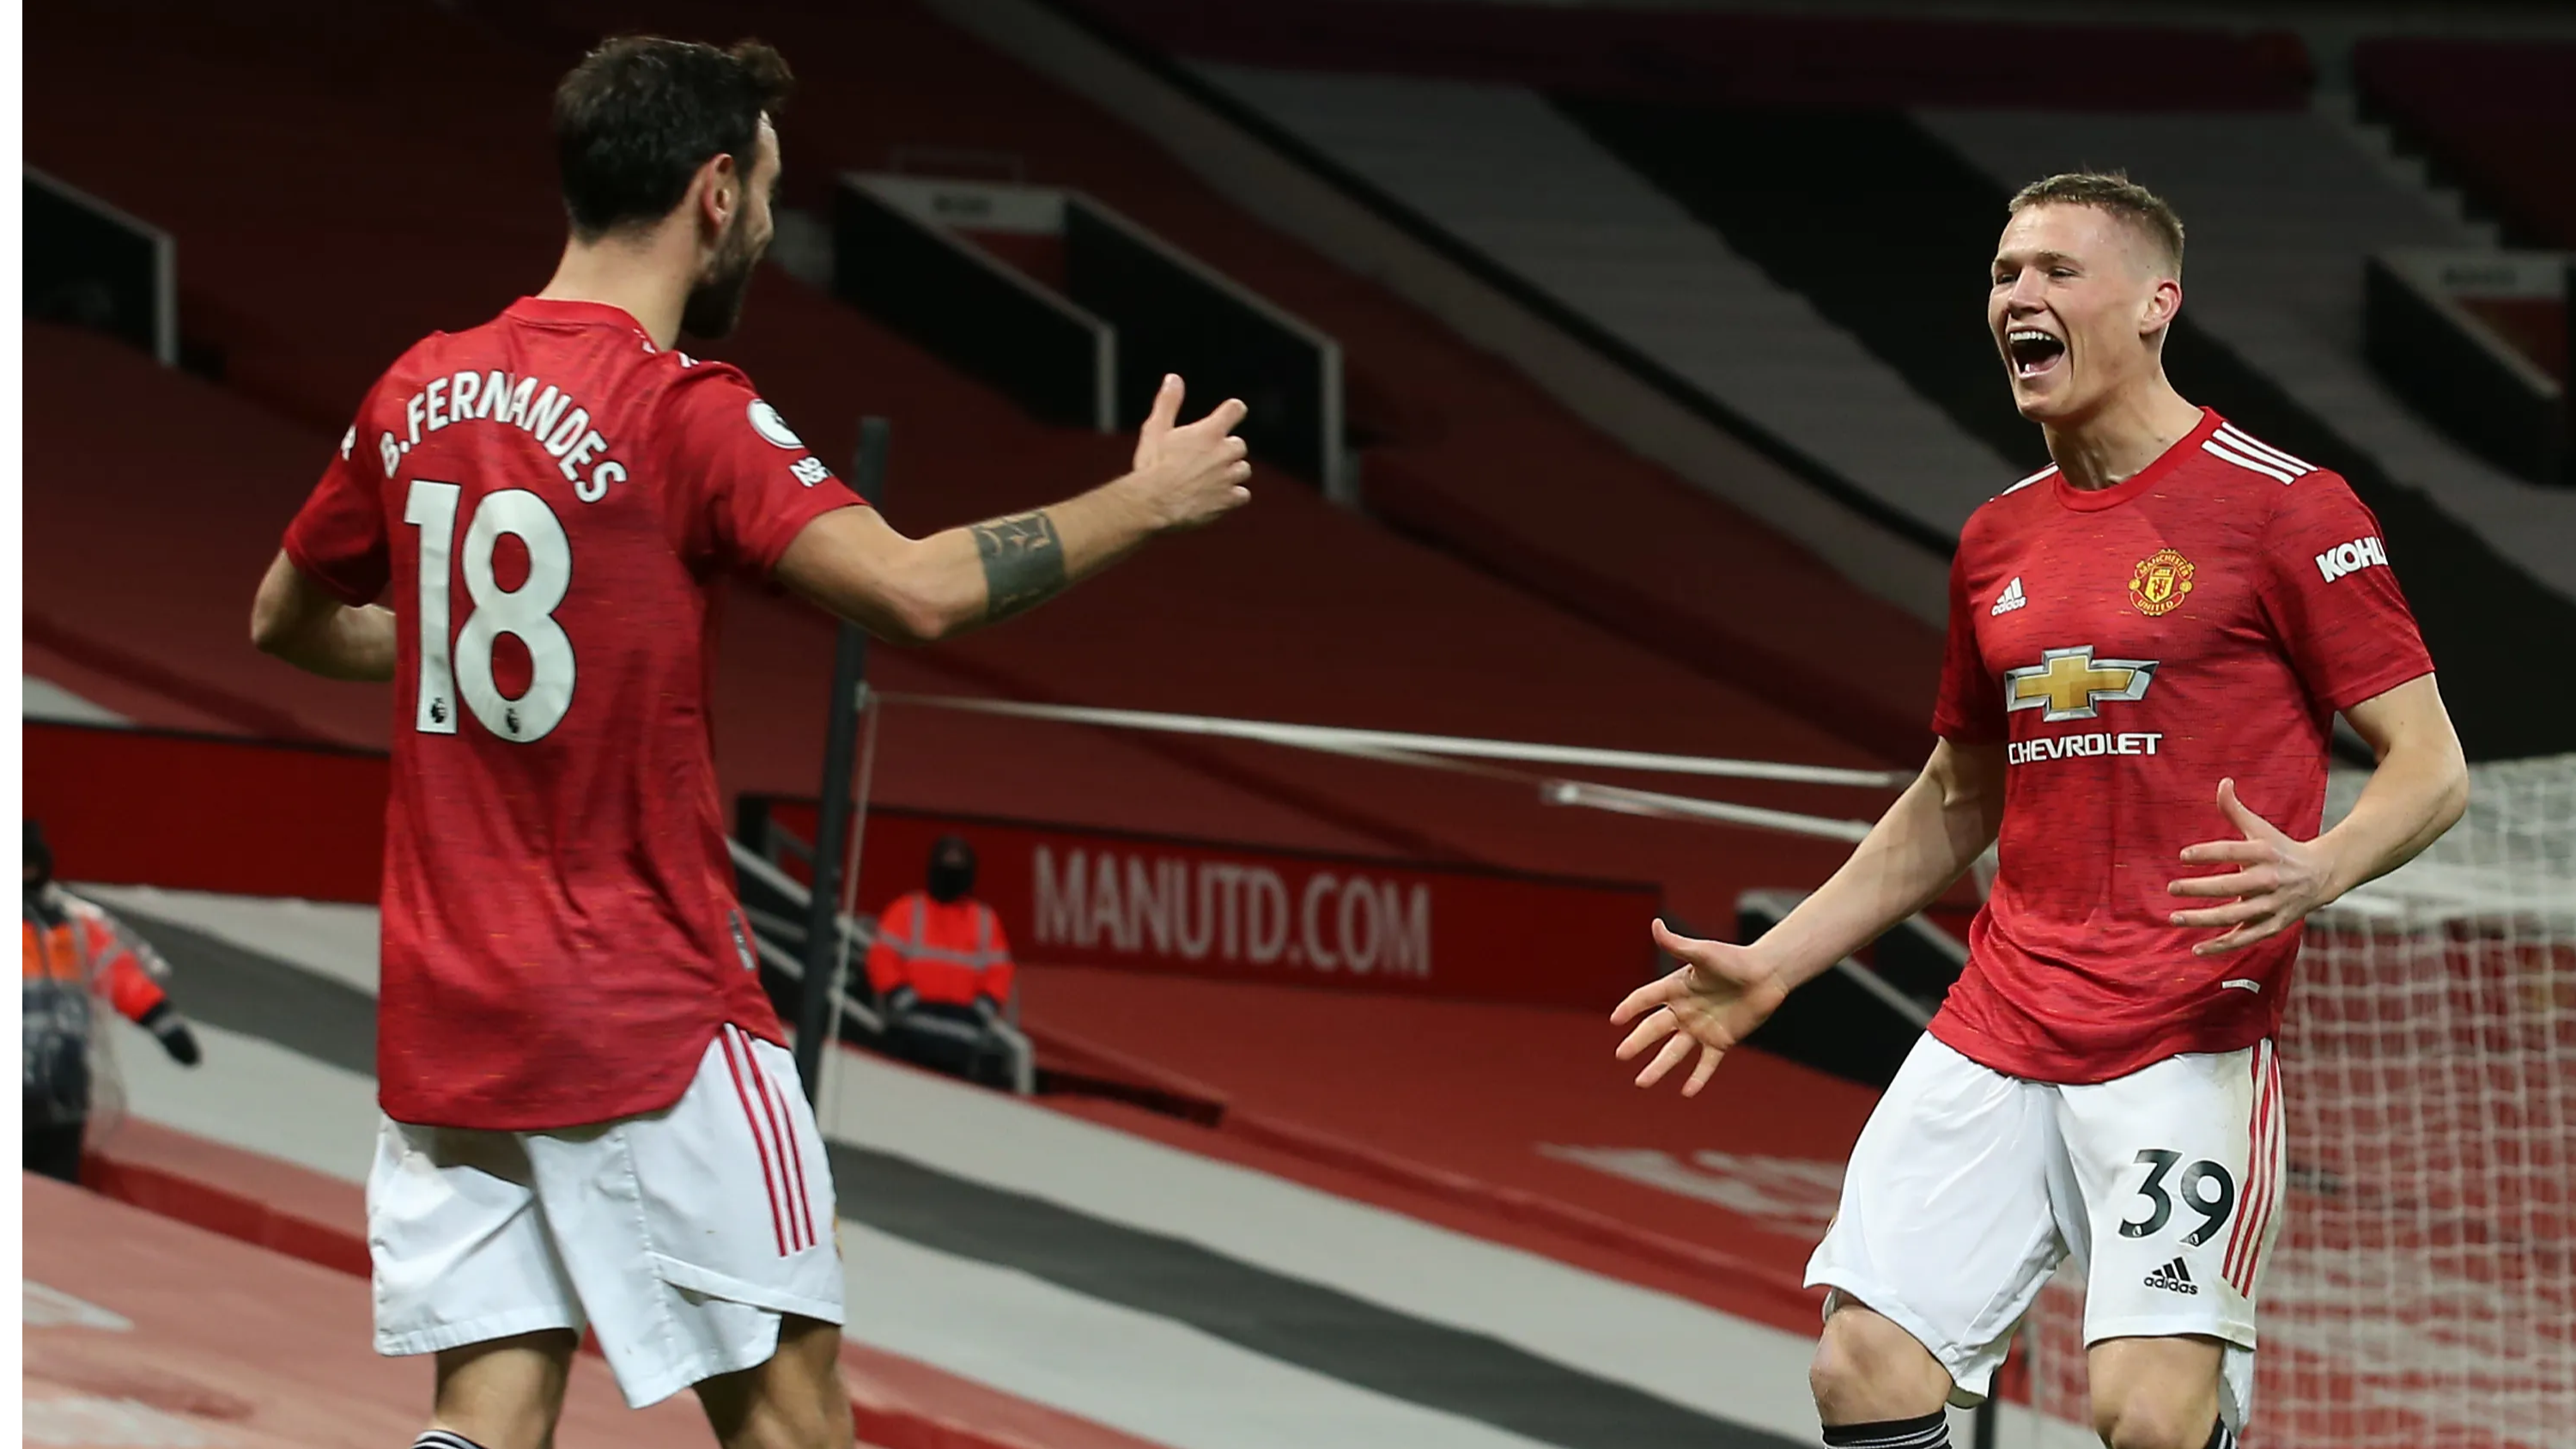 Premier League: Manchester United all but confirm Champions League spot with win over West Ham